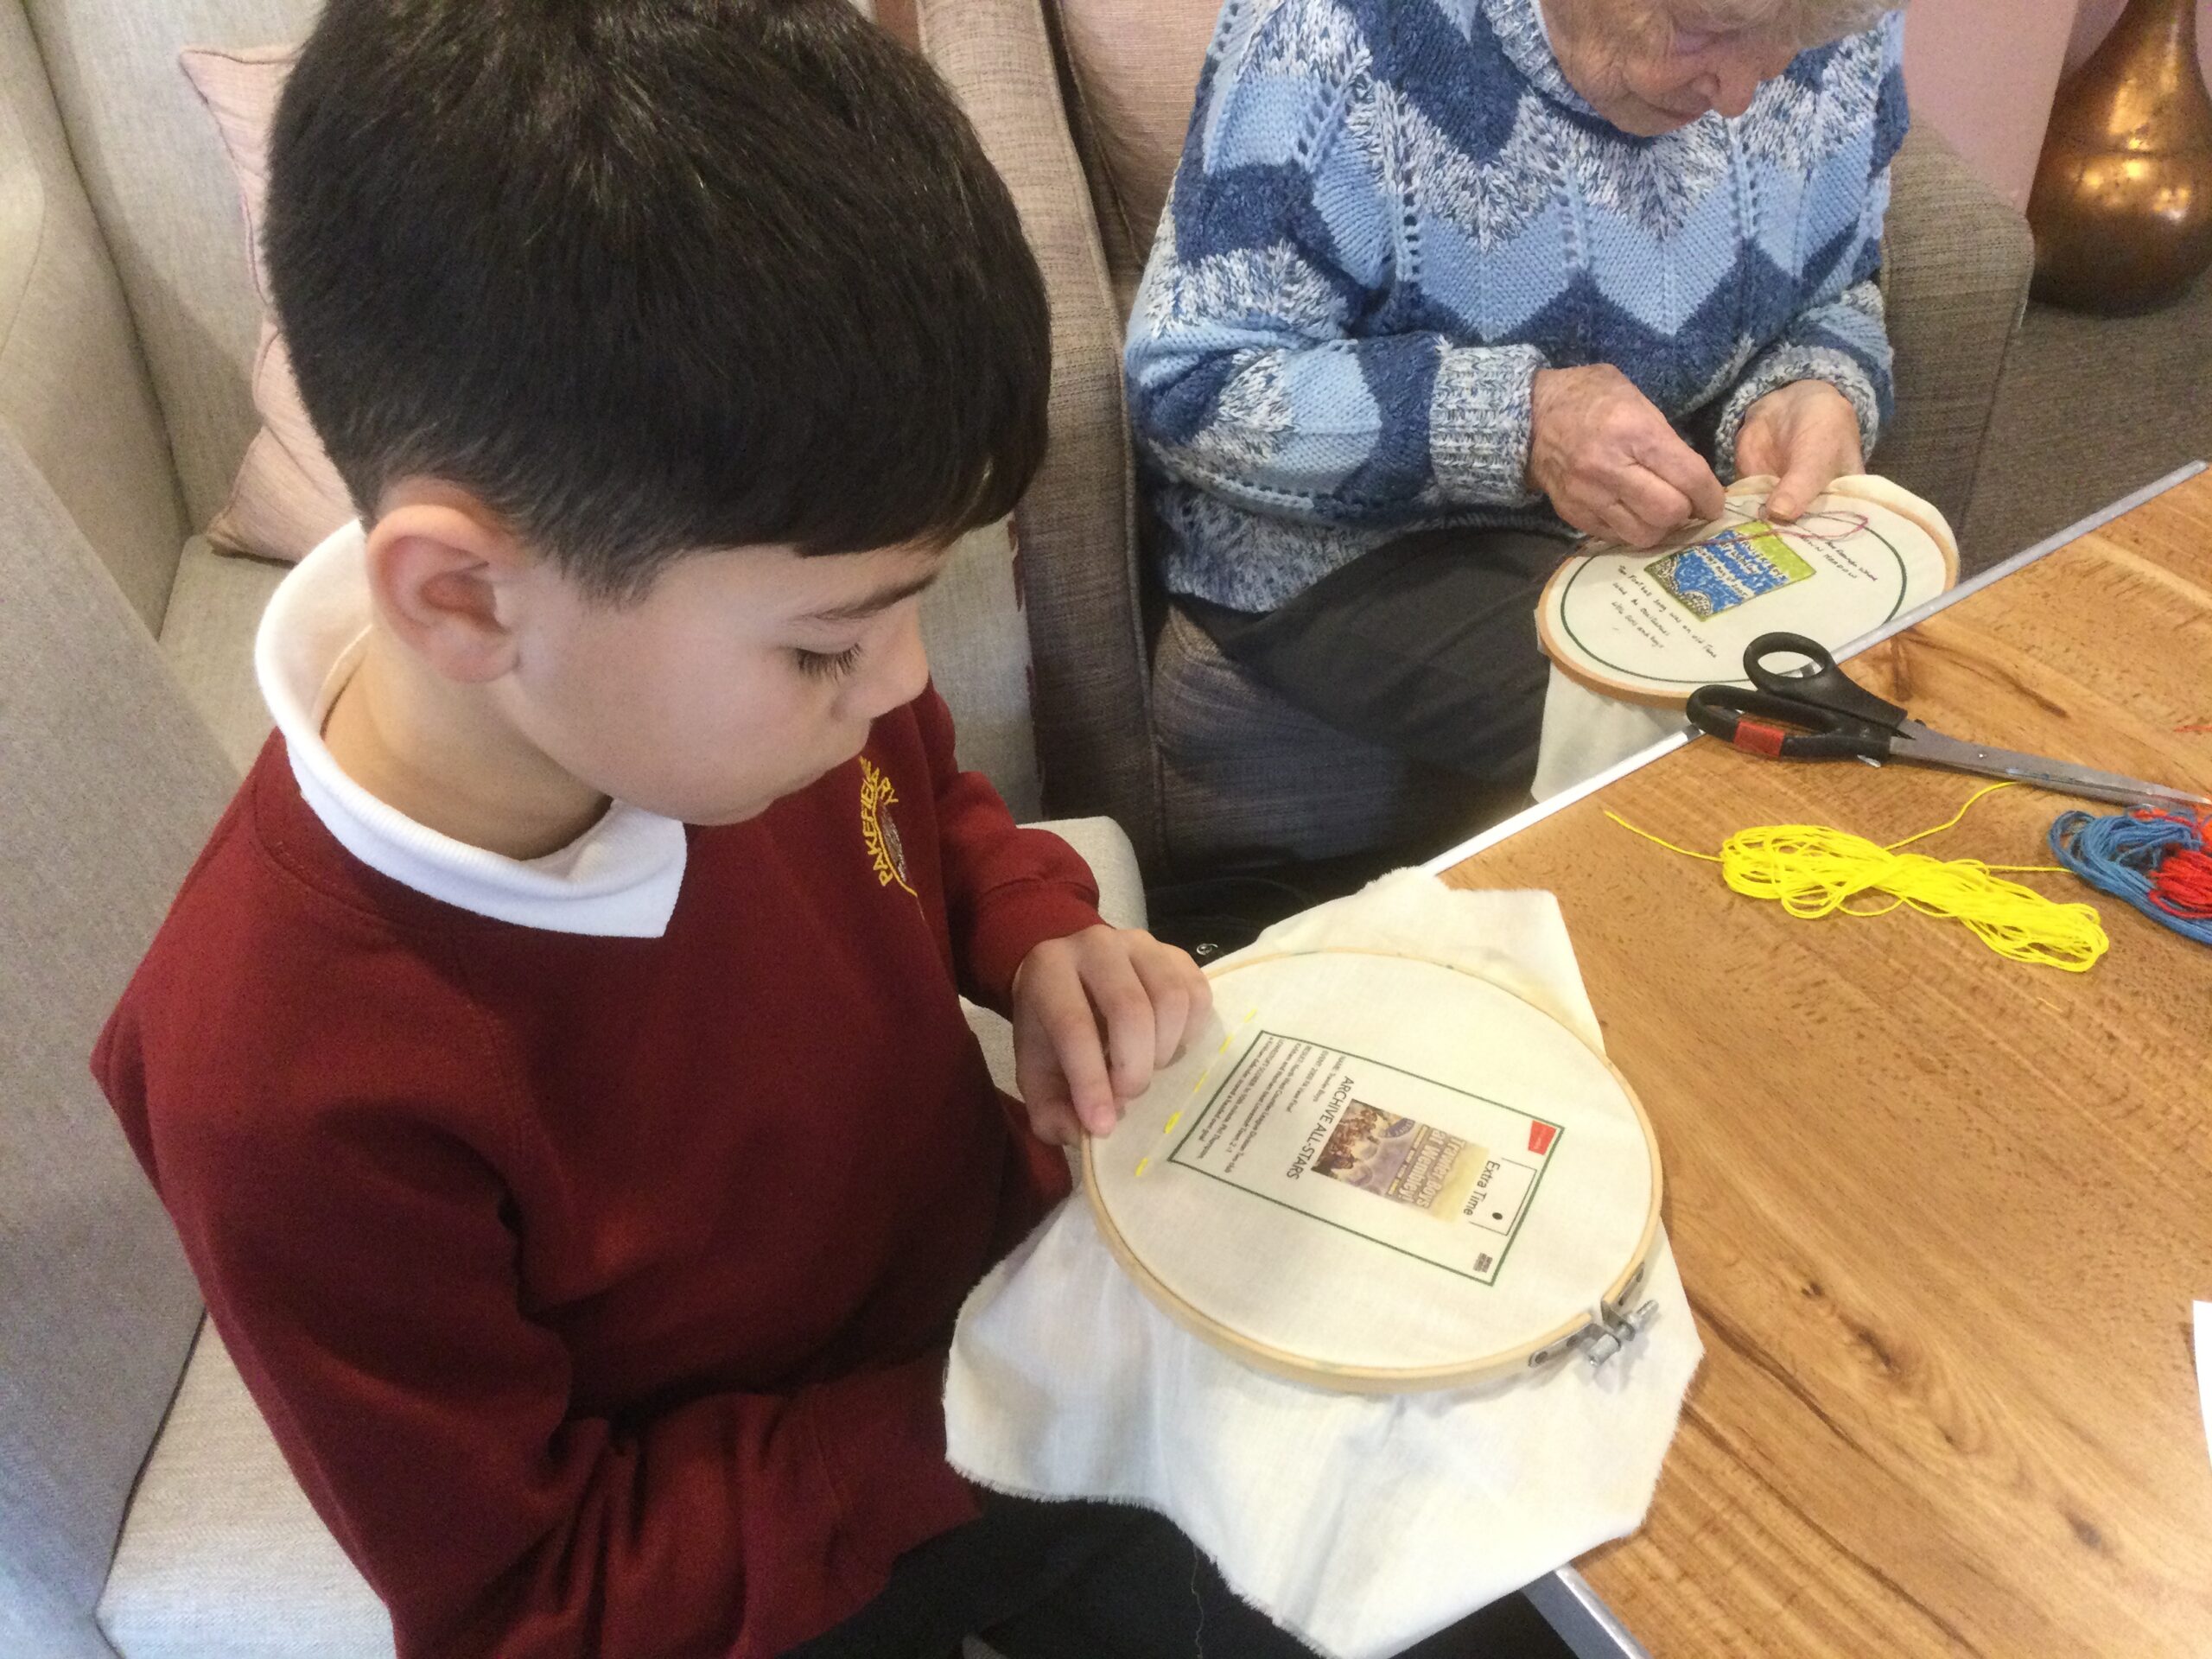 A child holding a printed piece of fabric in an embroidery hoop, he's sitting next to a woman stitching a picture